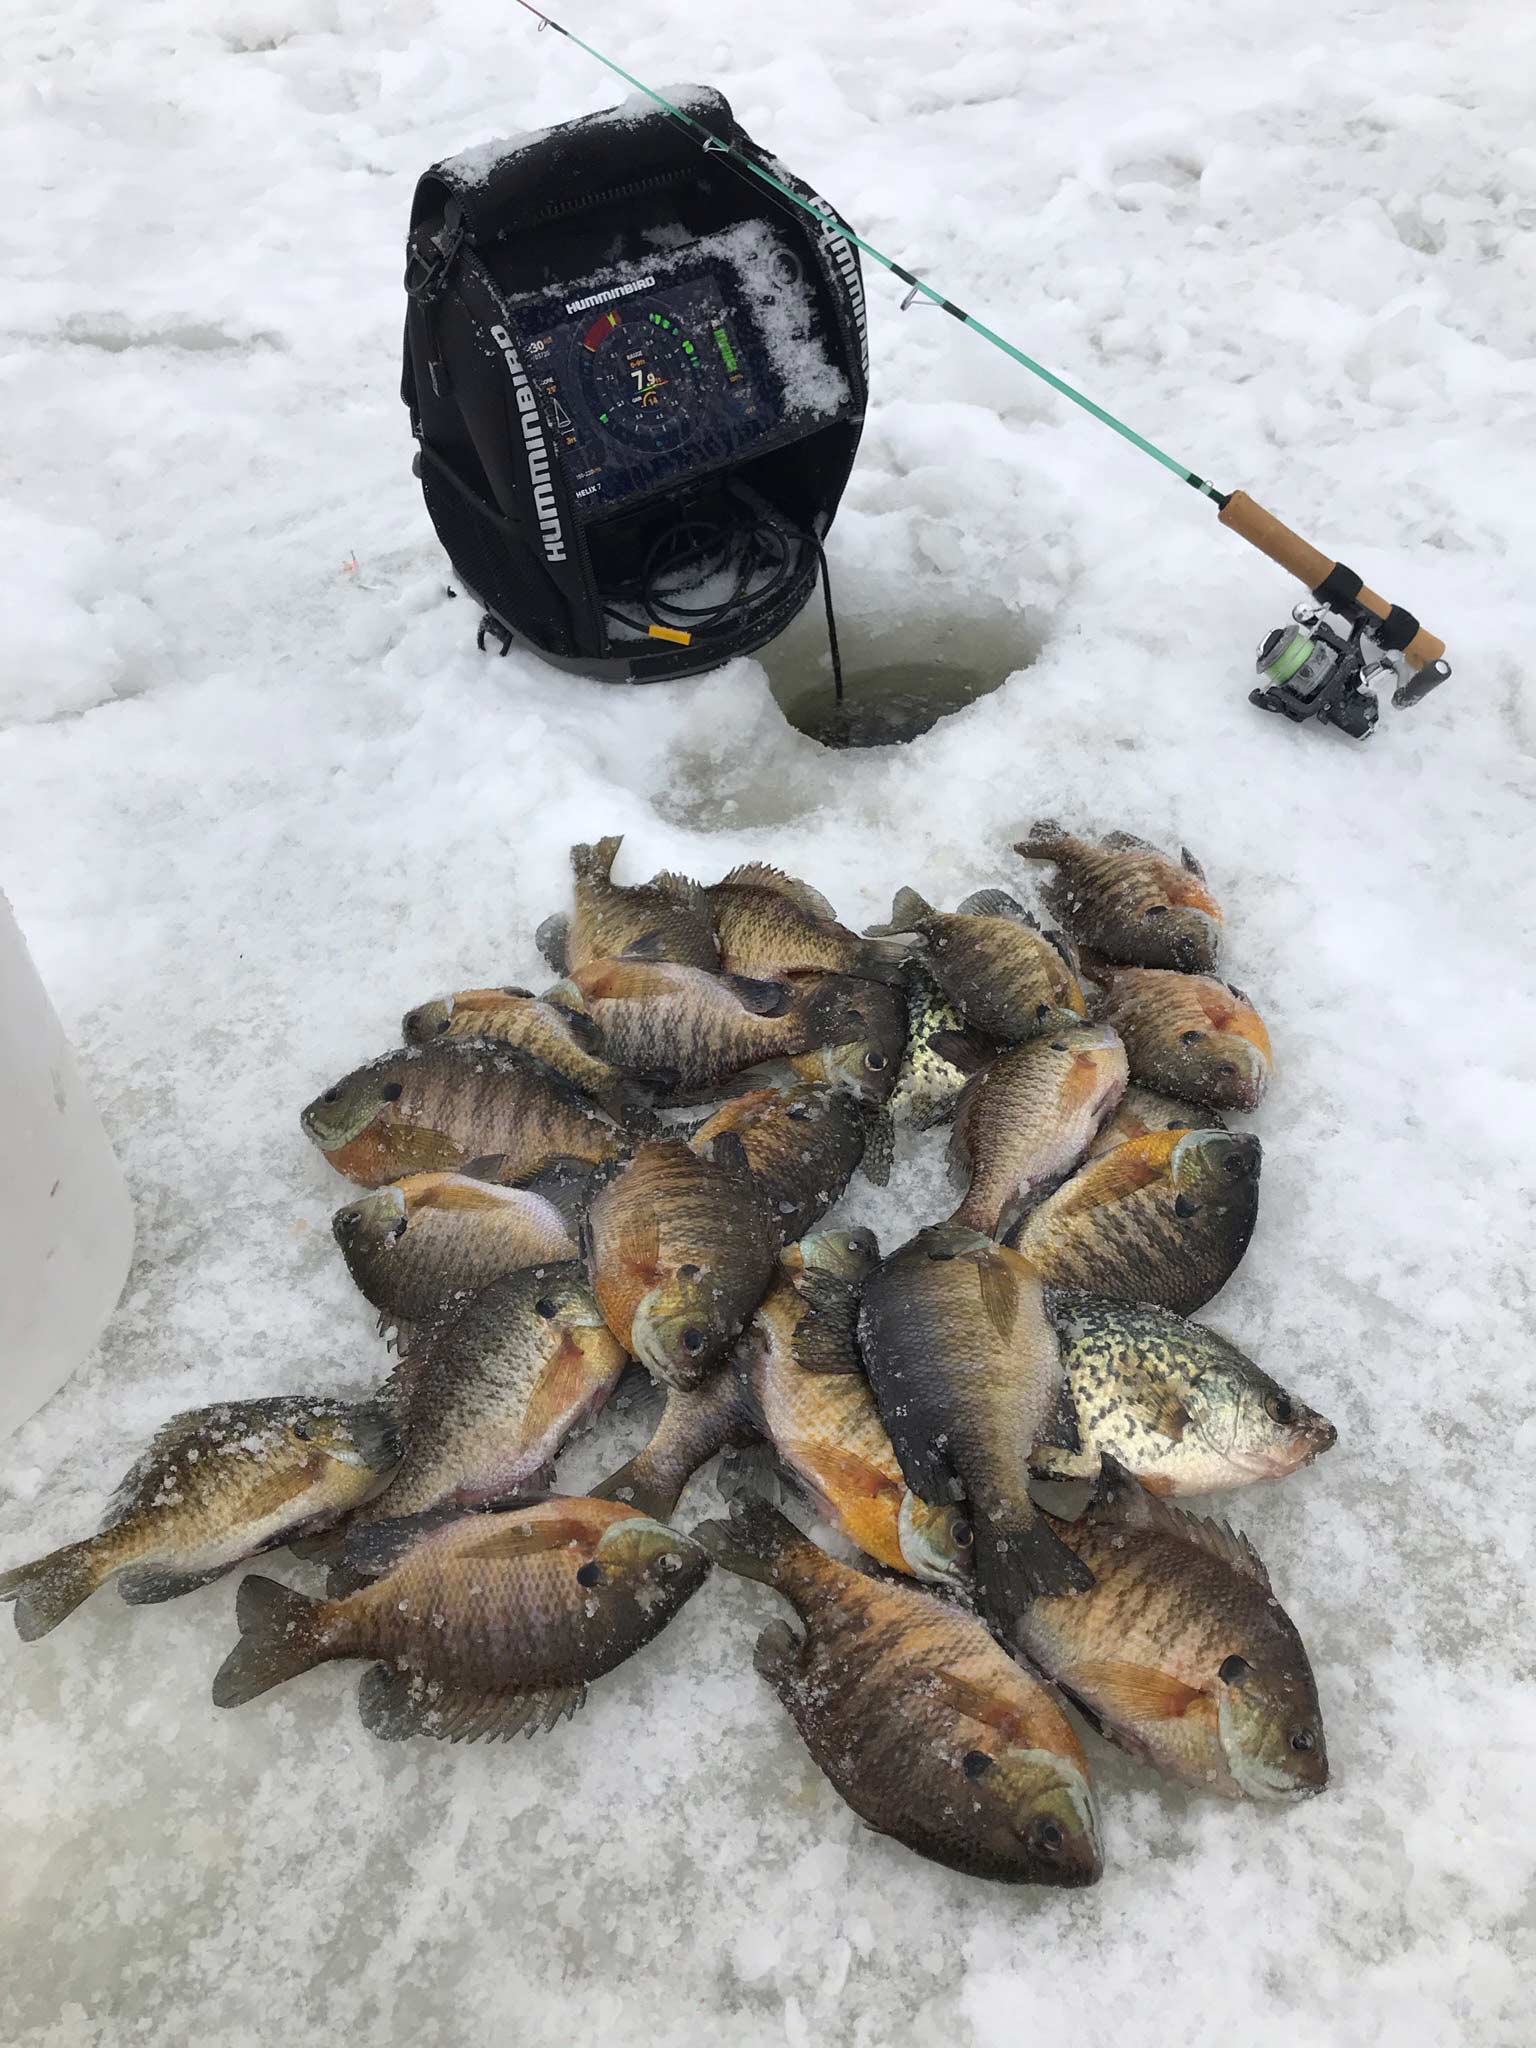 A haul of panfish on ice.